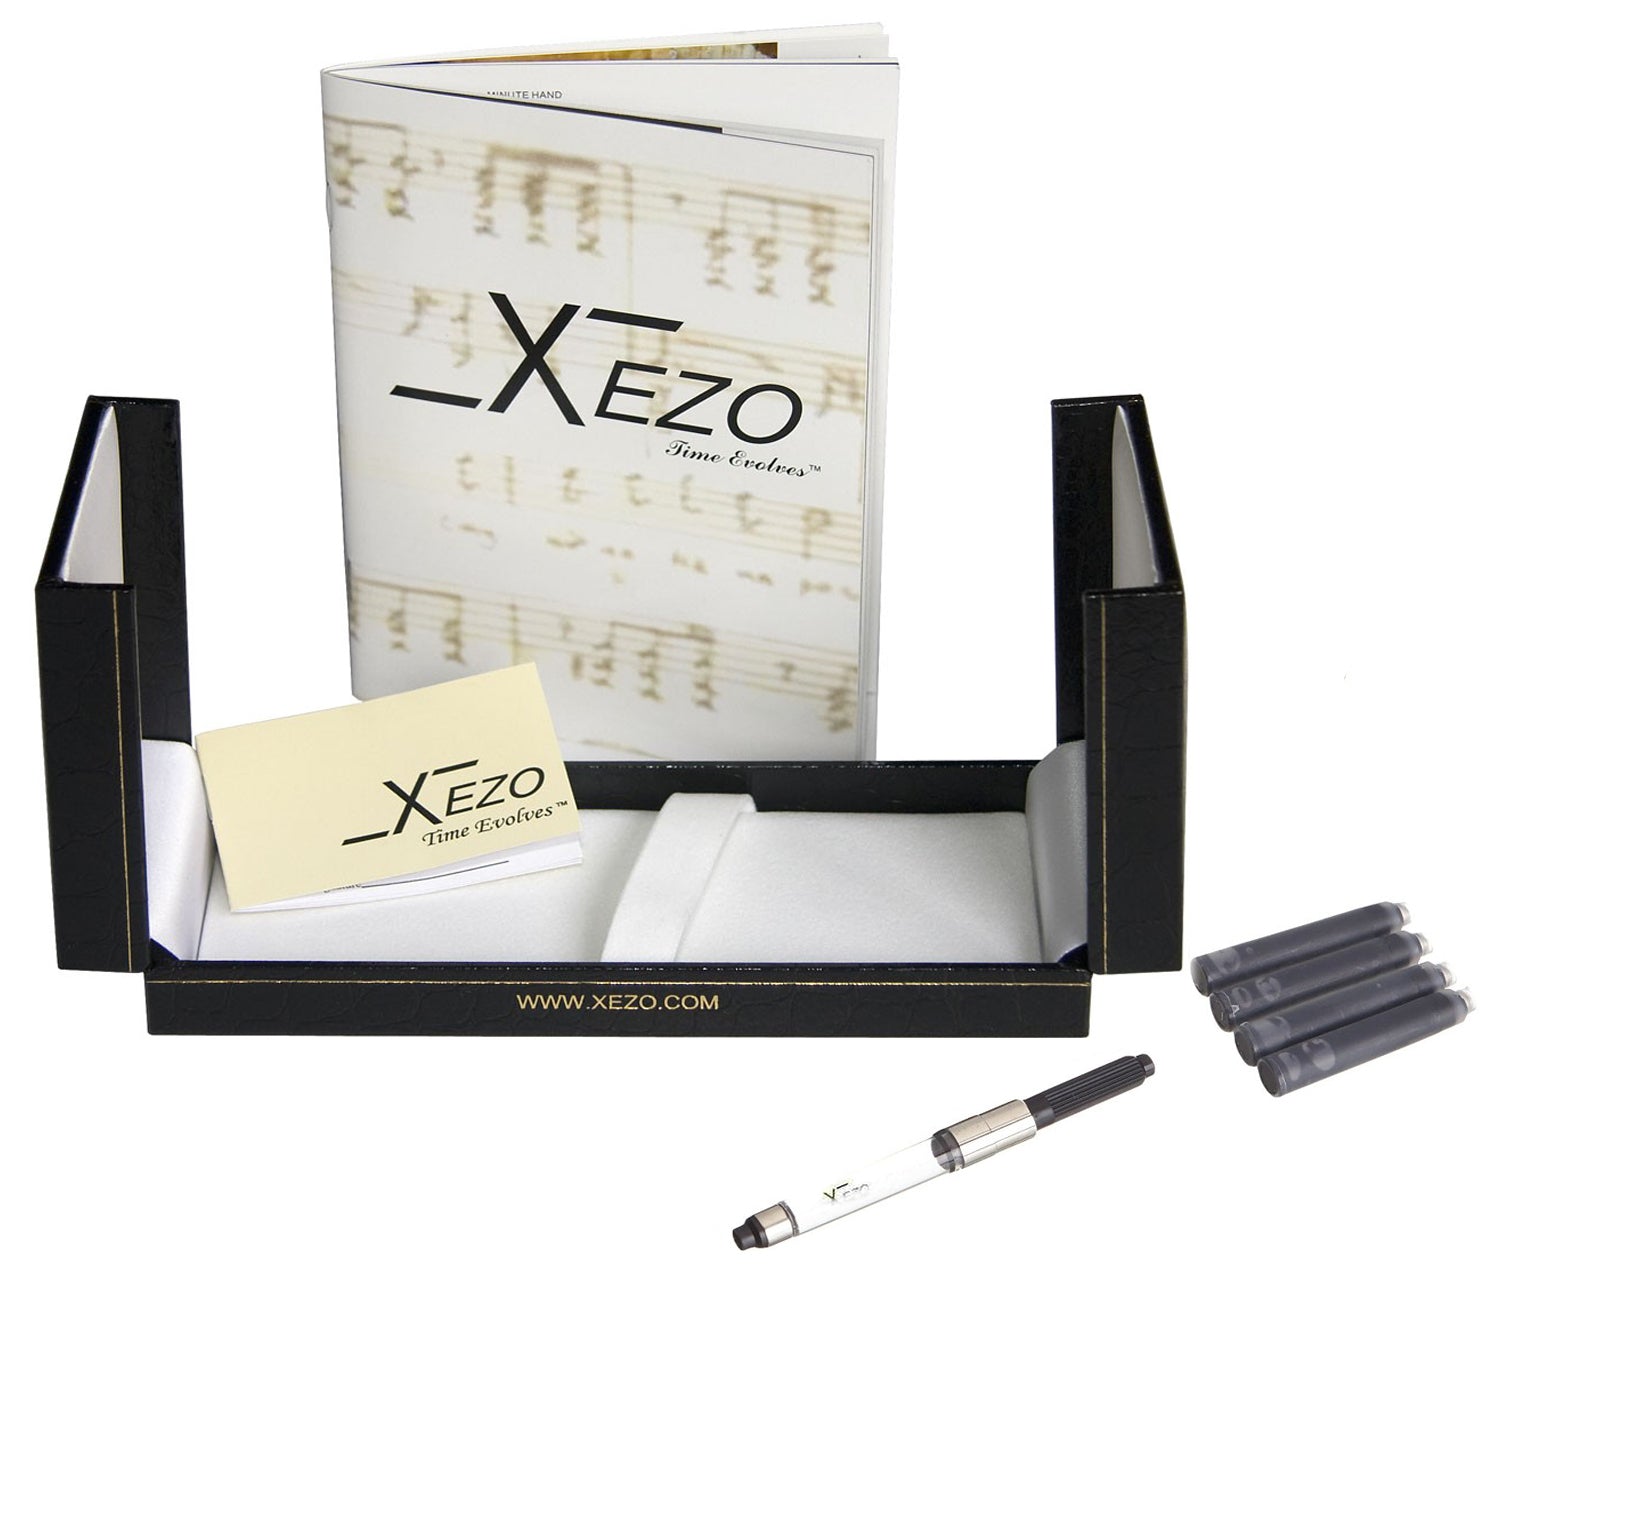 Xezo - Black gift box, certificate, manual, chrome-plated ink converter, and four ink cartridges of the Urbanite Brown FM fountain pen